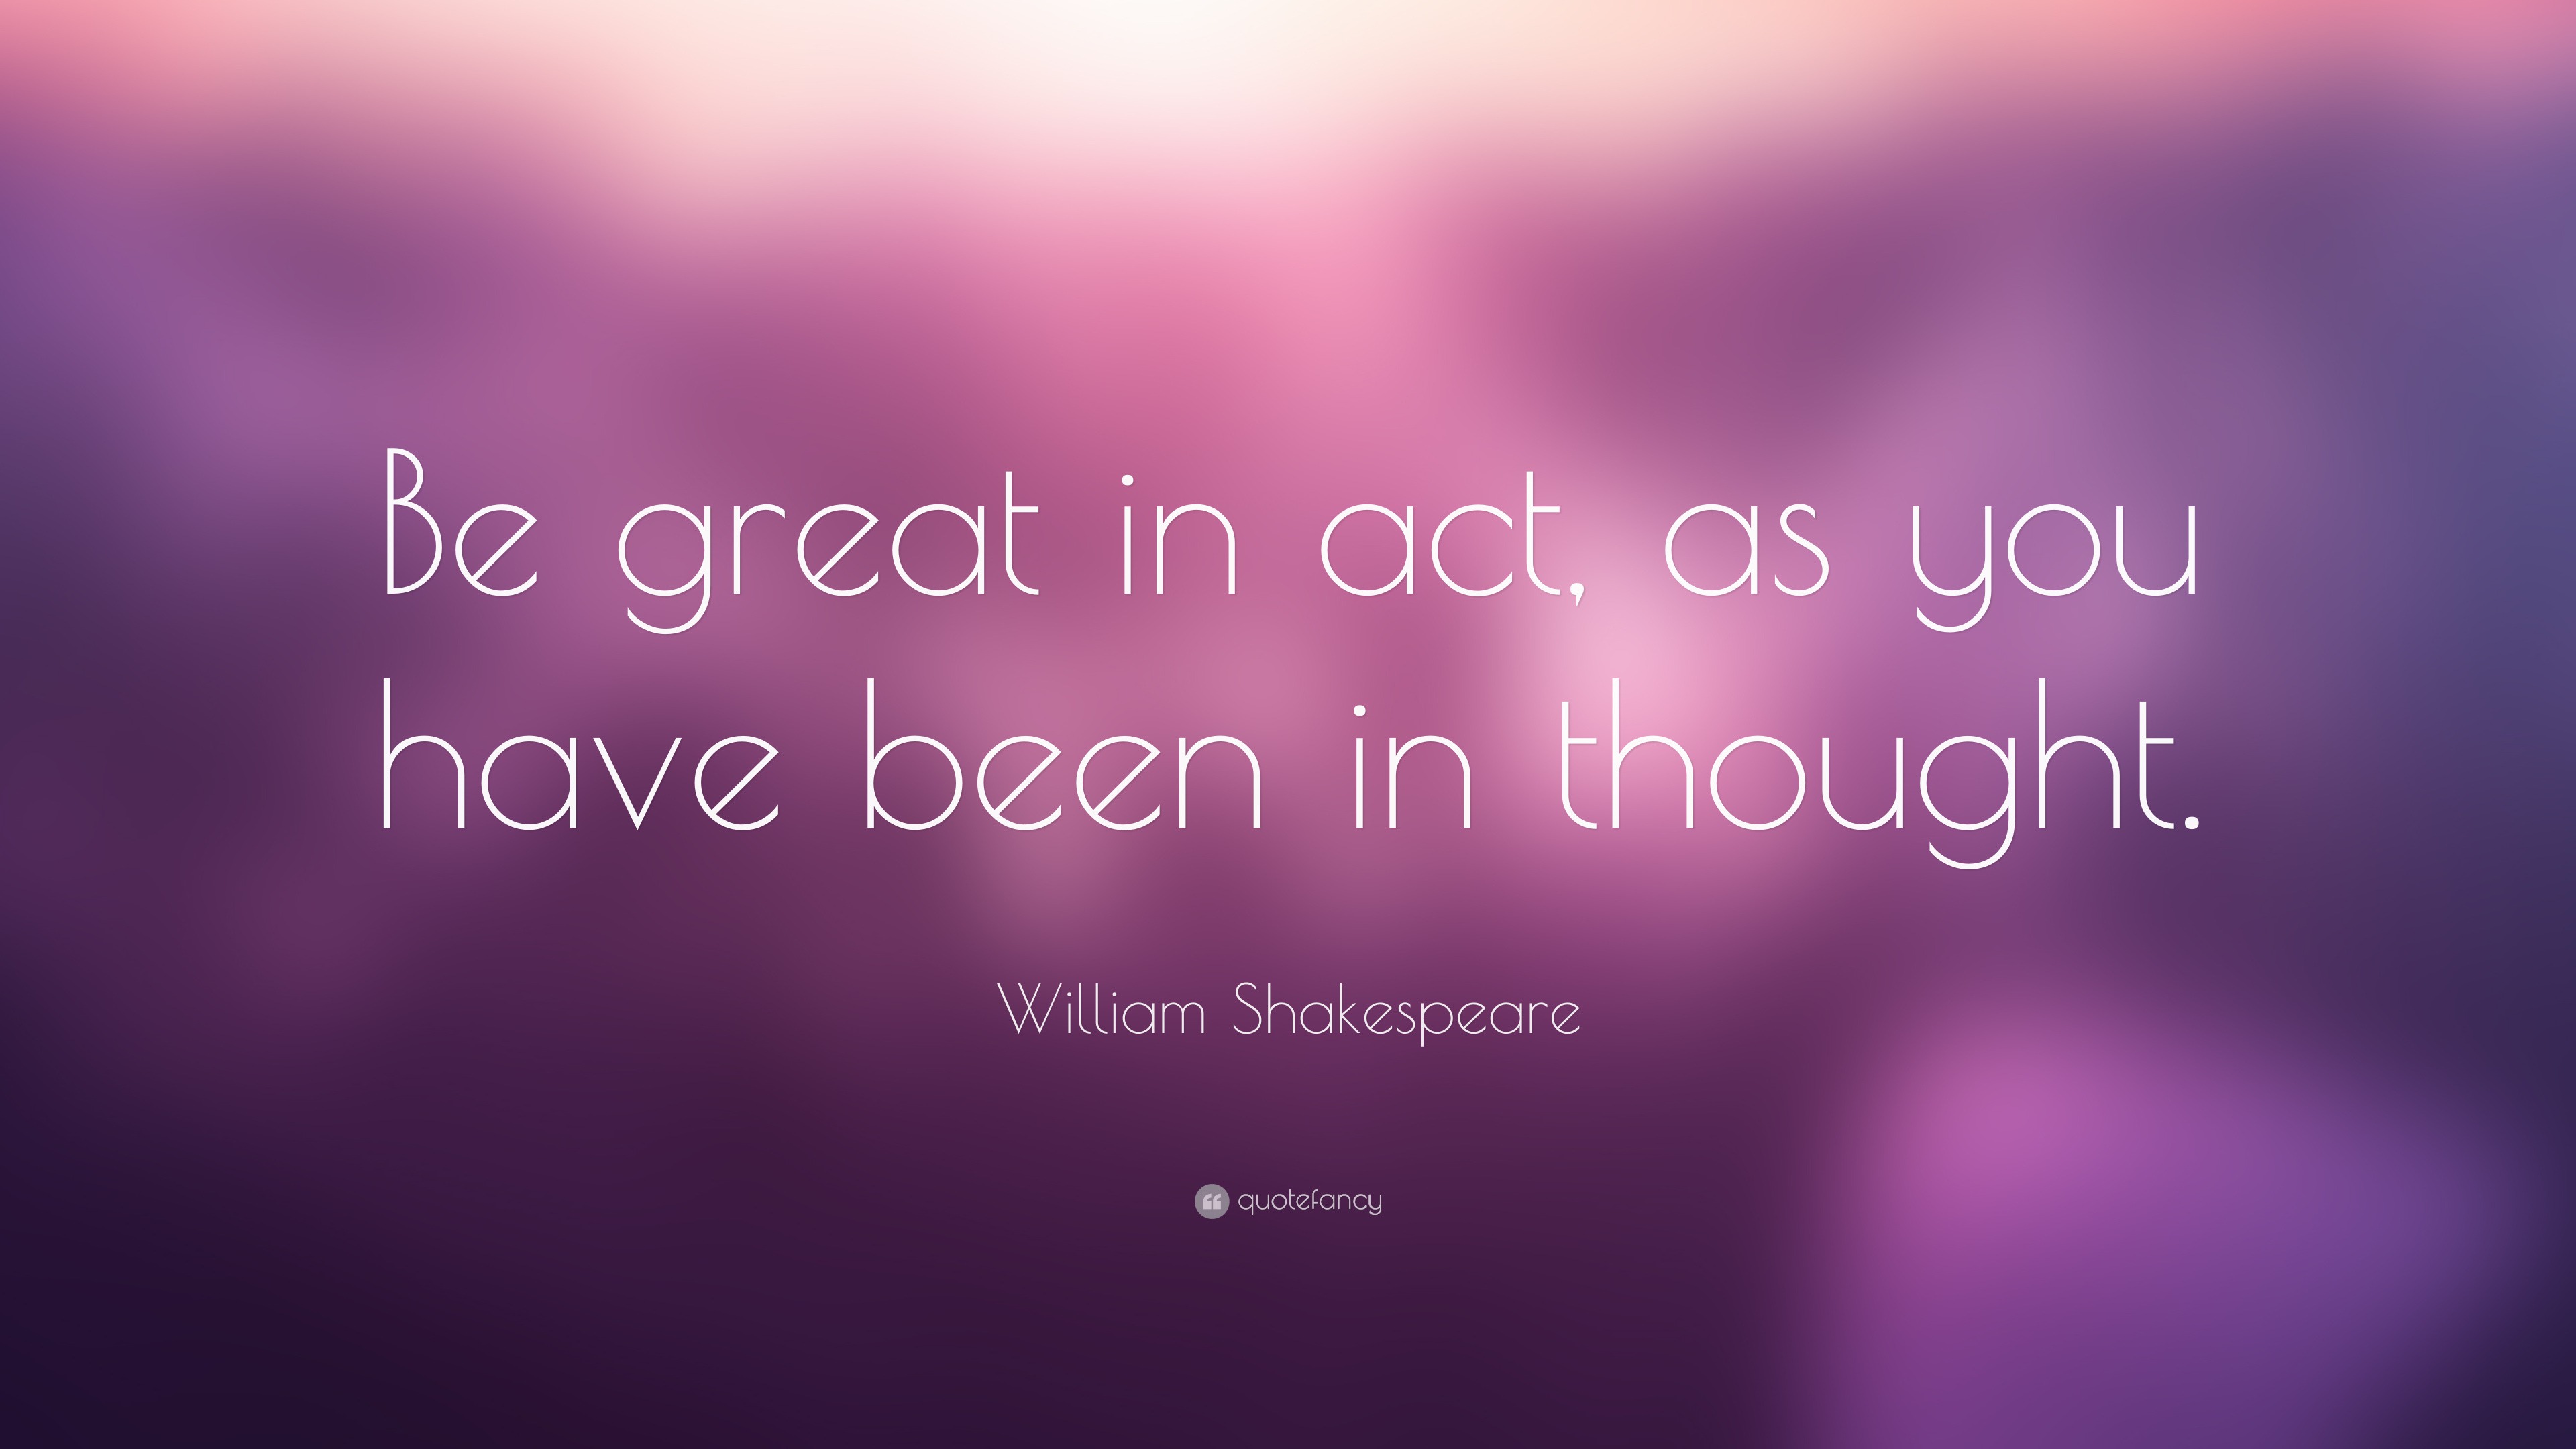 William Shakespeare Quote: “Be great in act, as you have been in thought.”